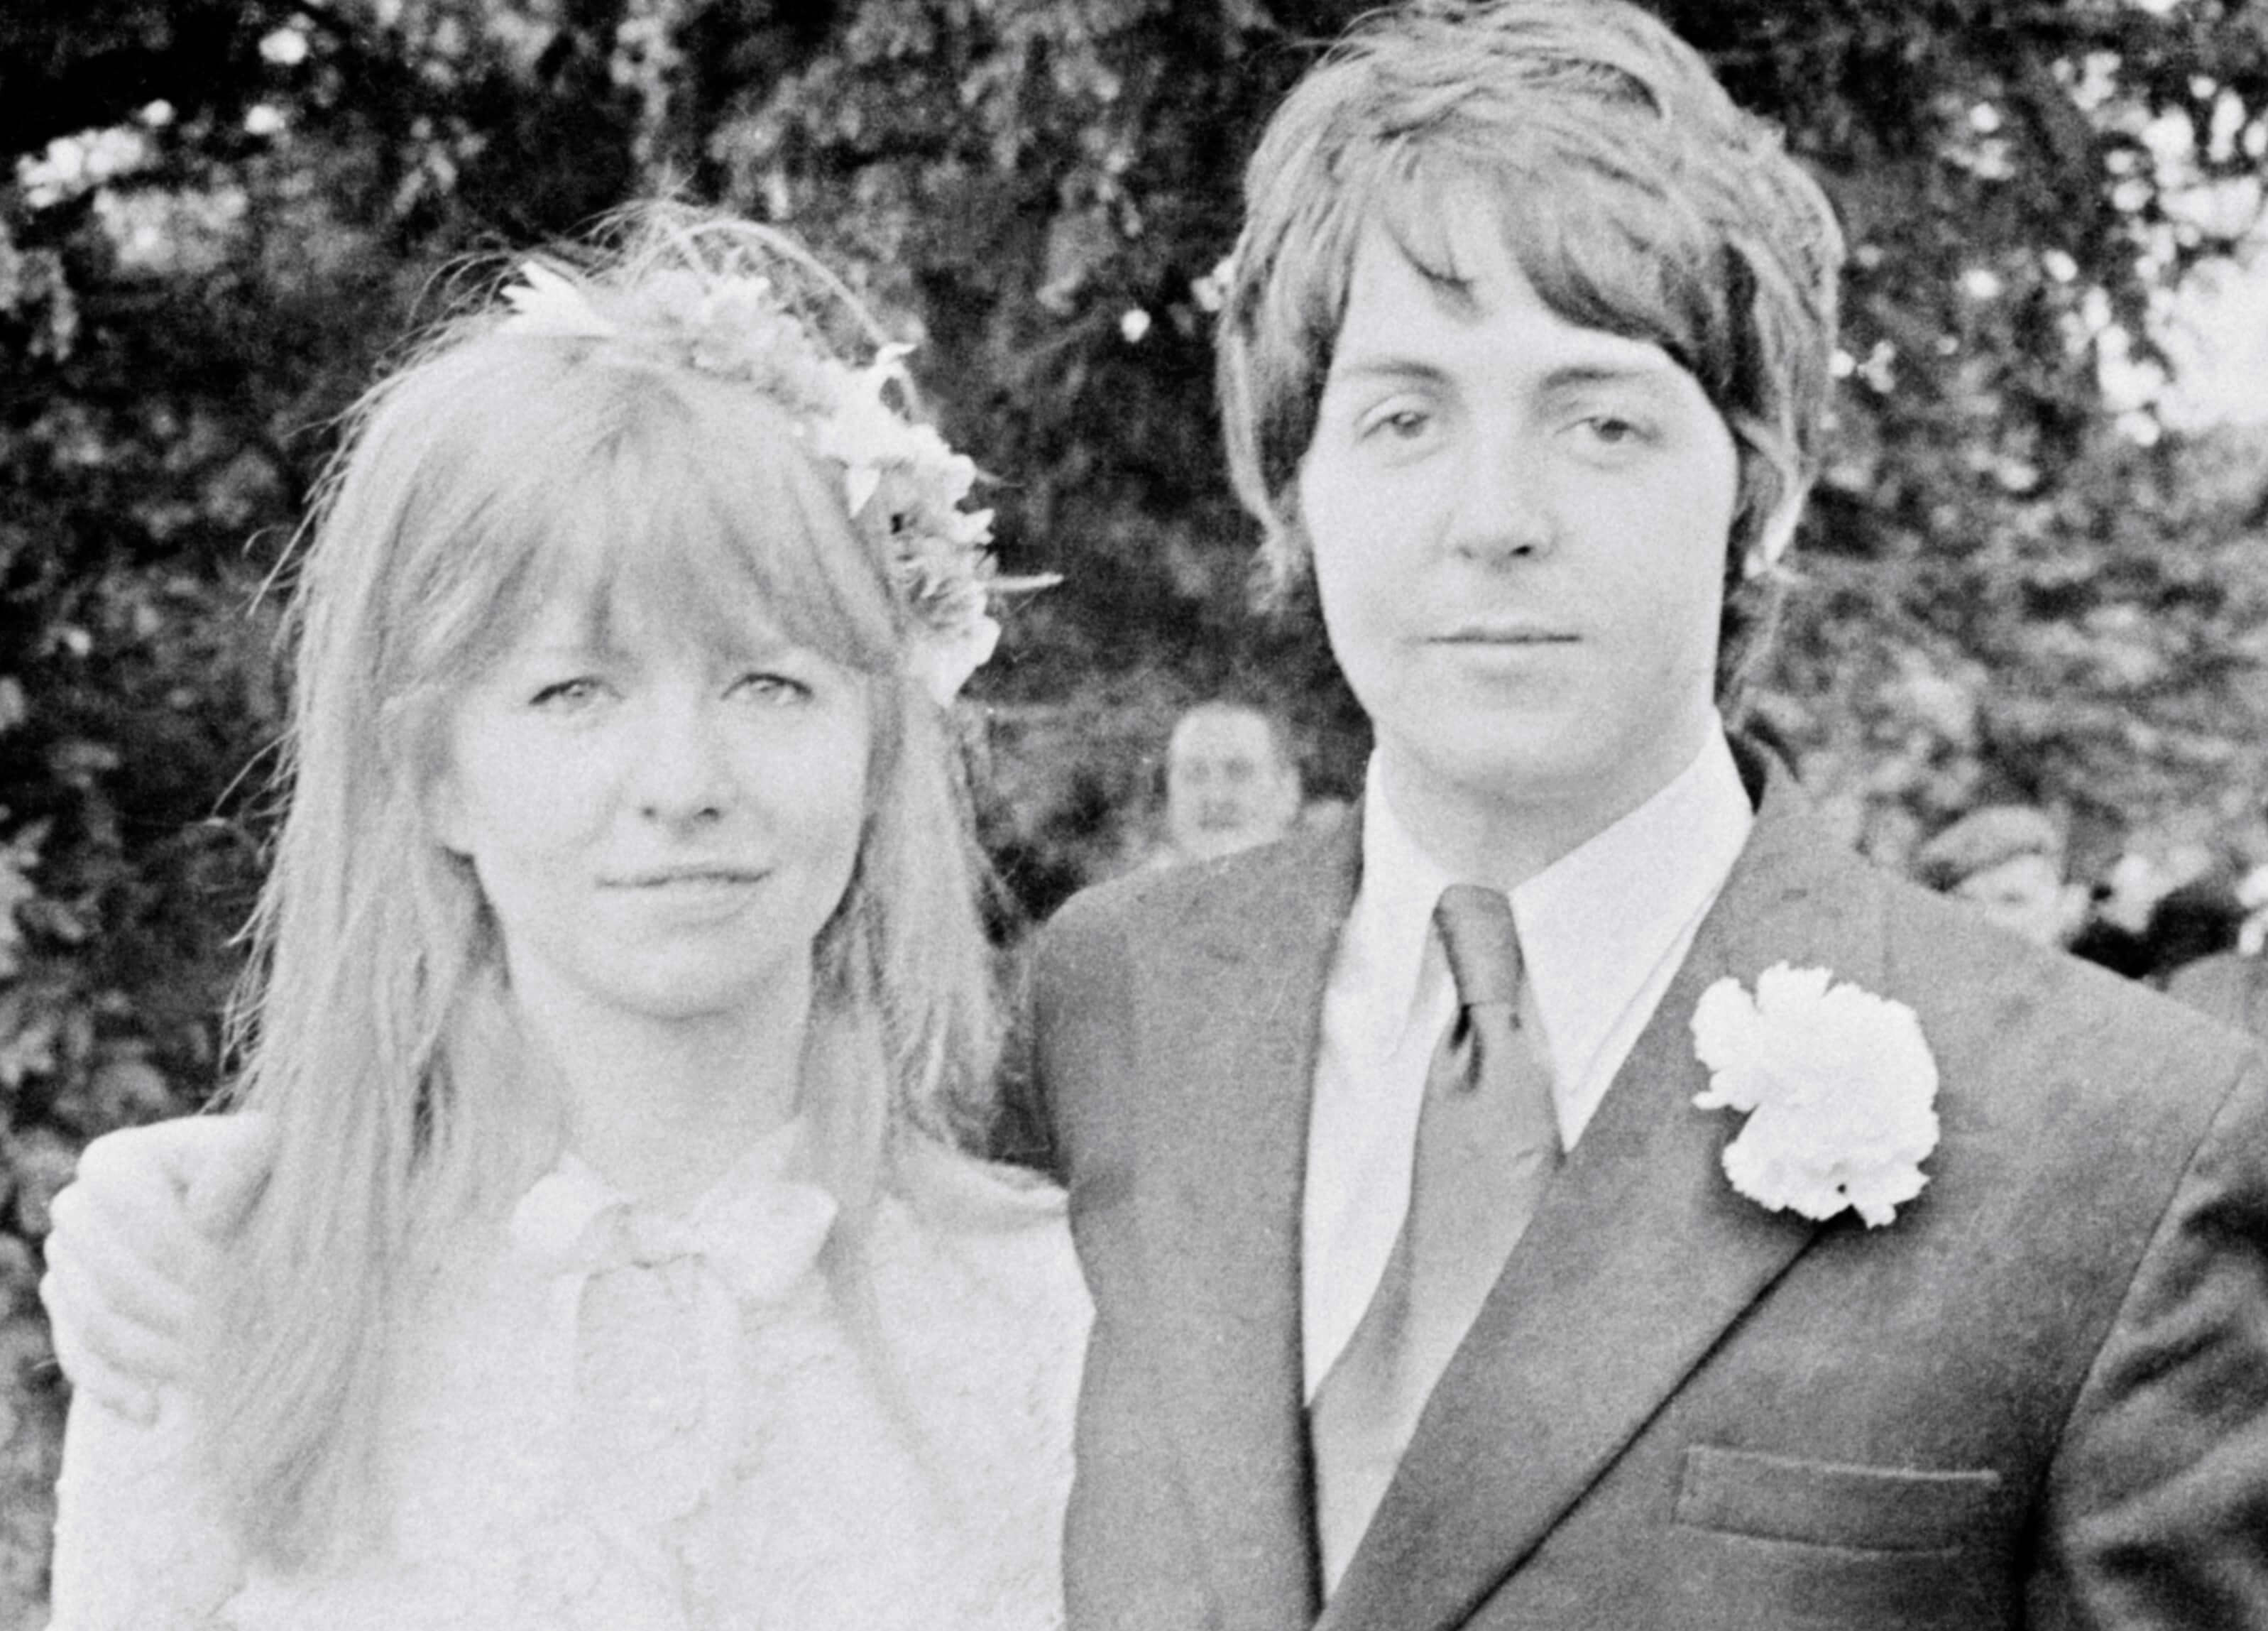 Linda McCartney and The Beatles' Paul McCartney in black-and-white